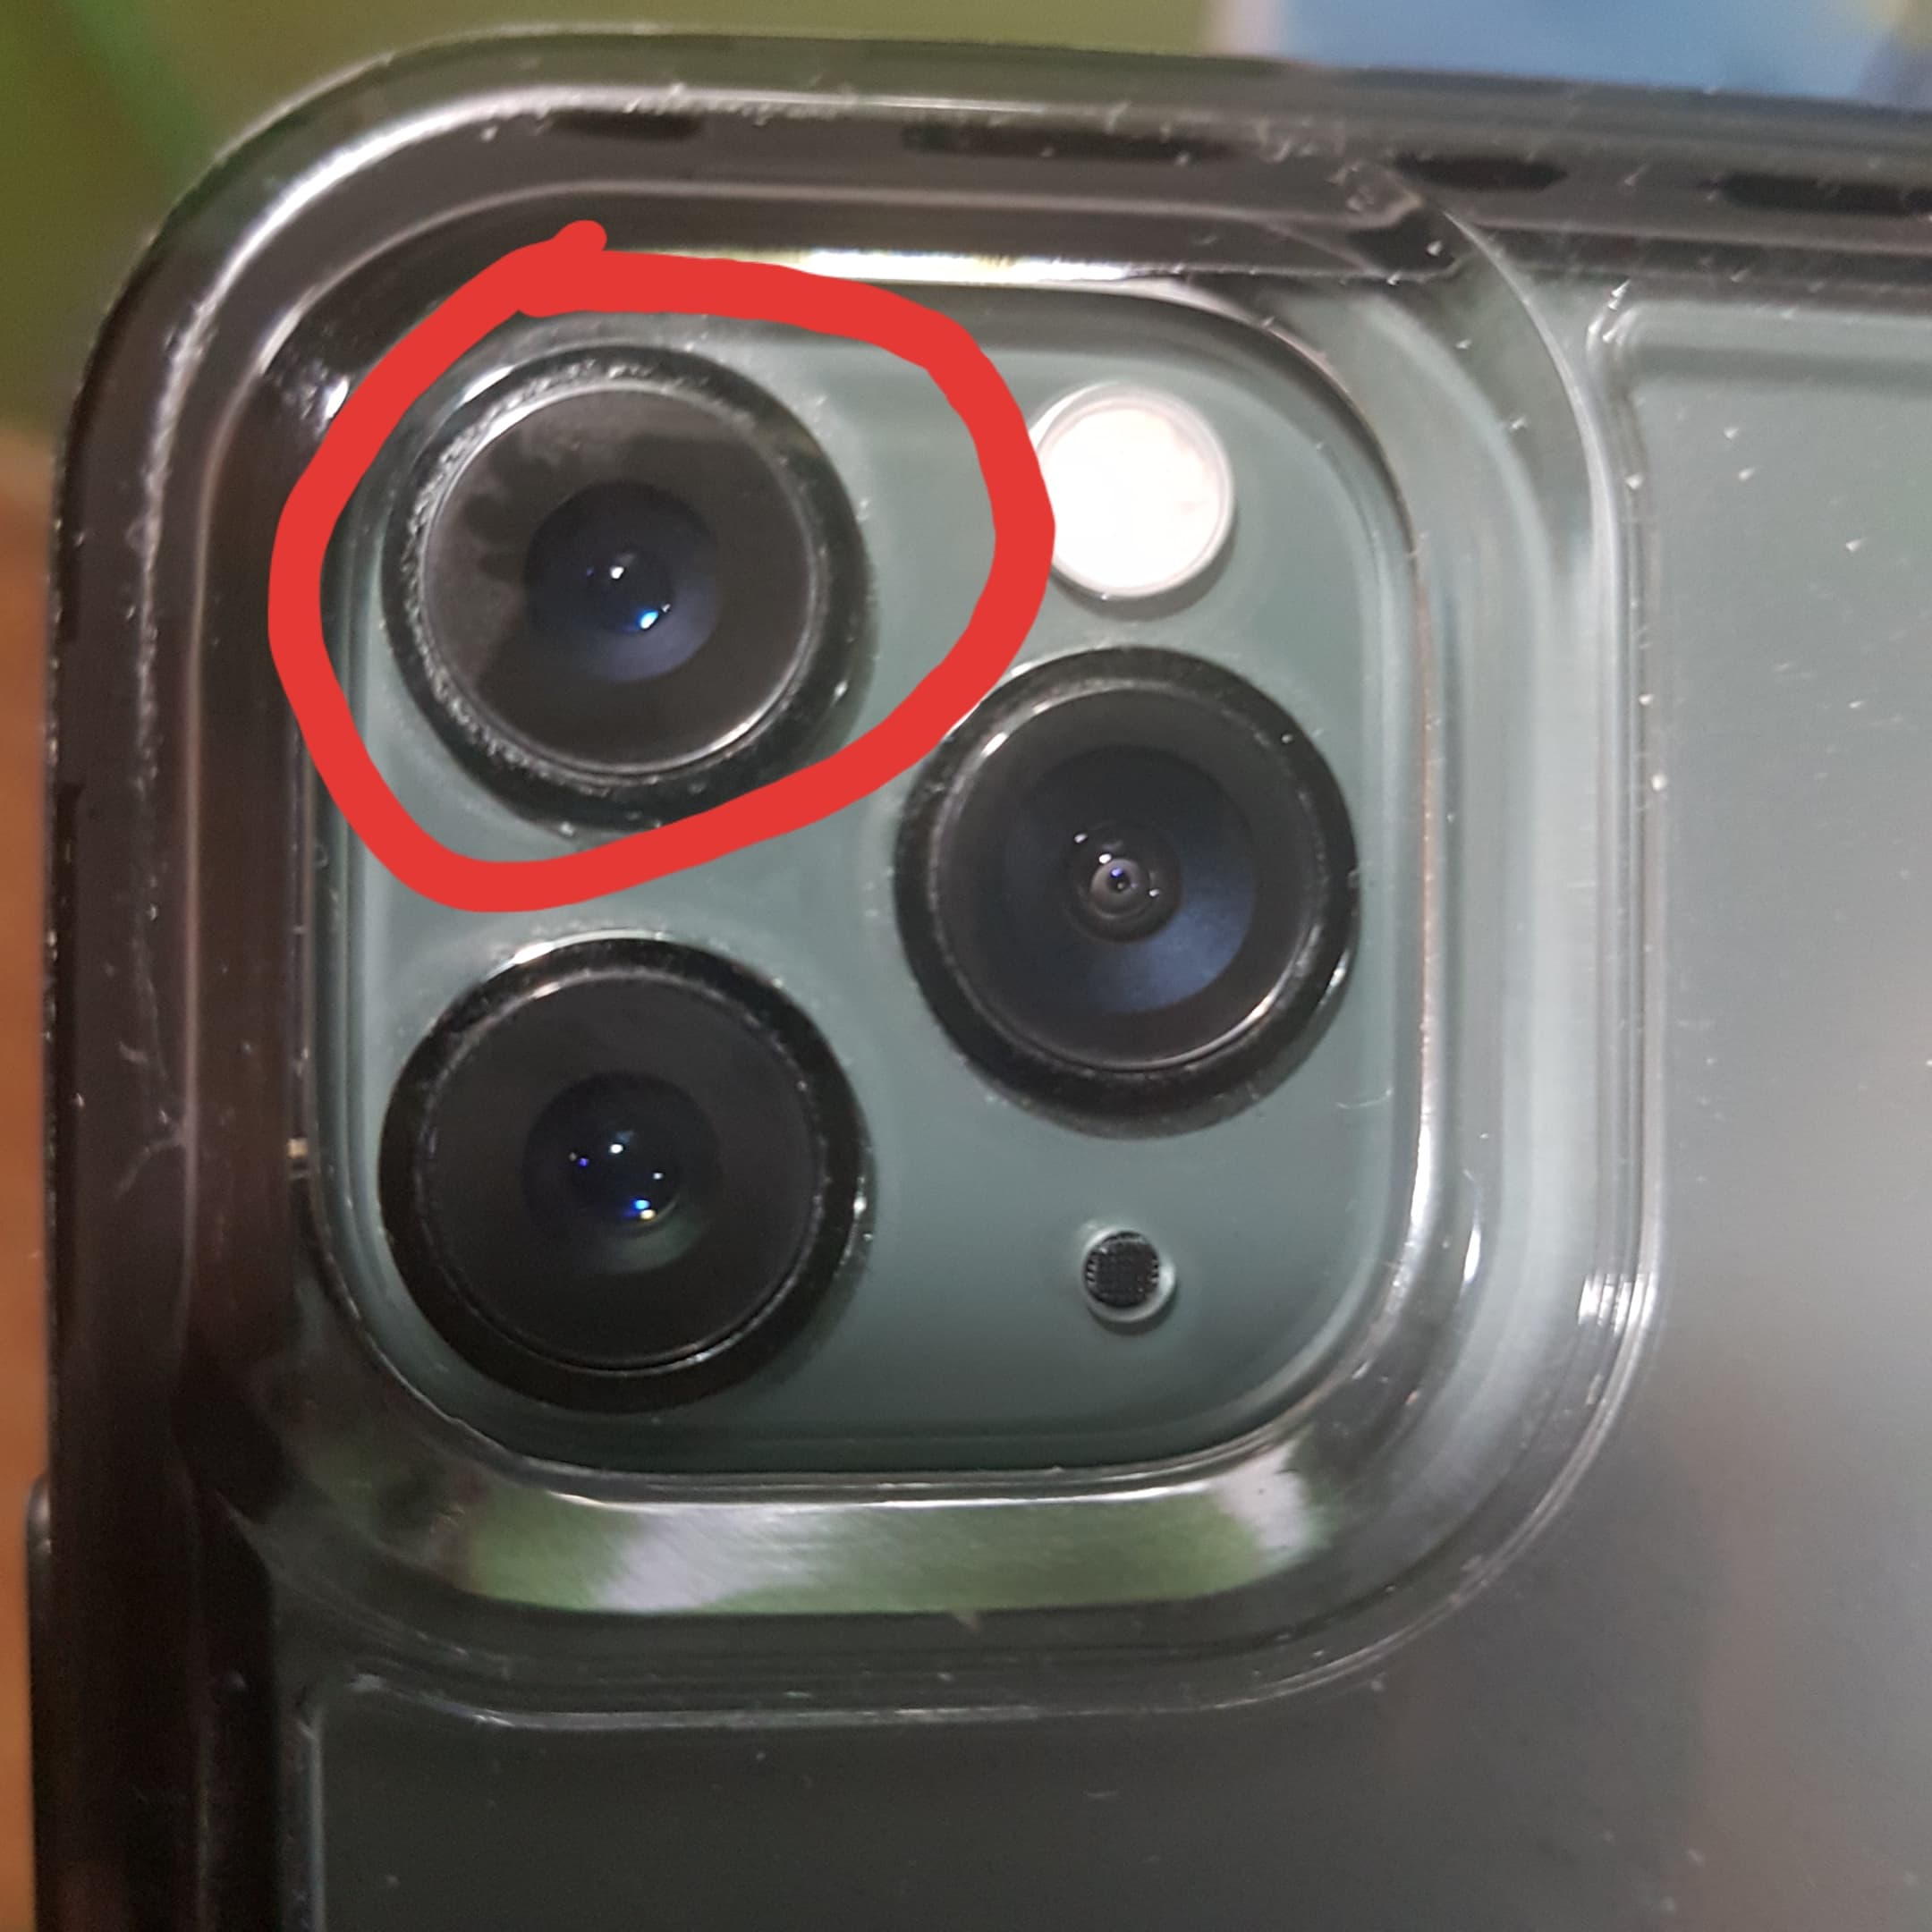 Do iPhone lenses scratch easily?